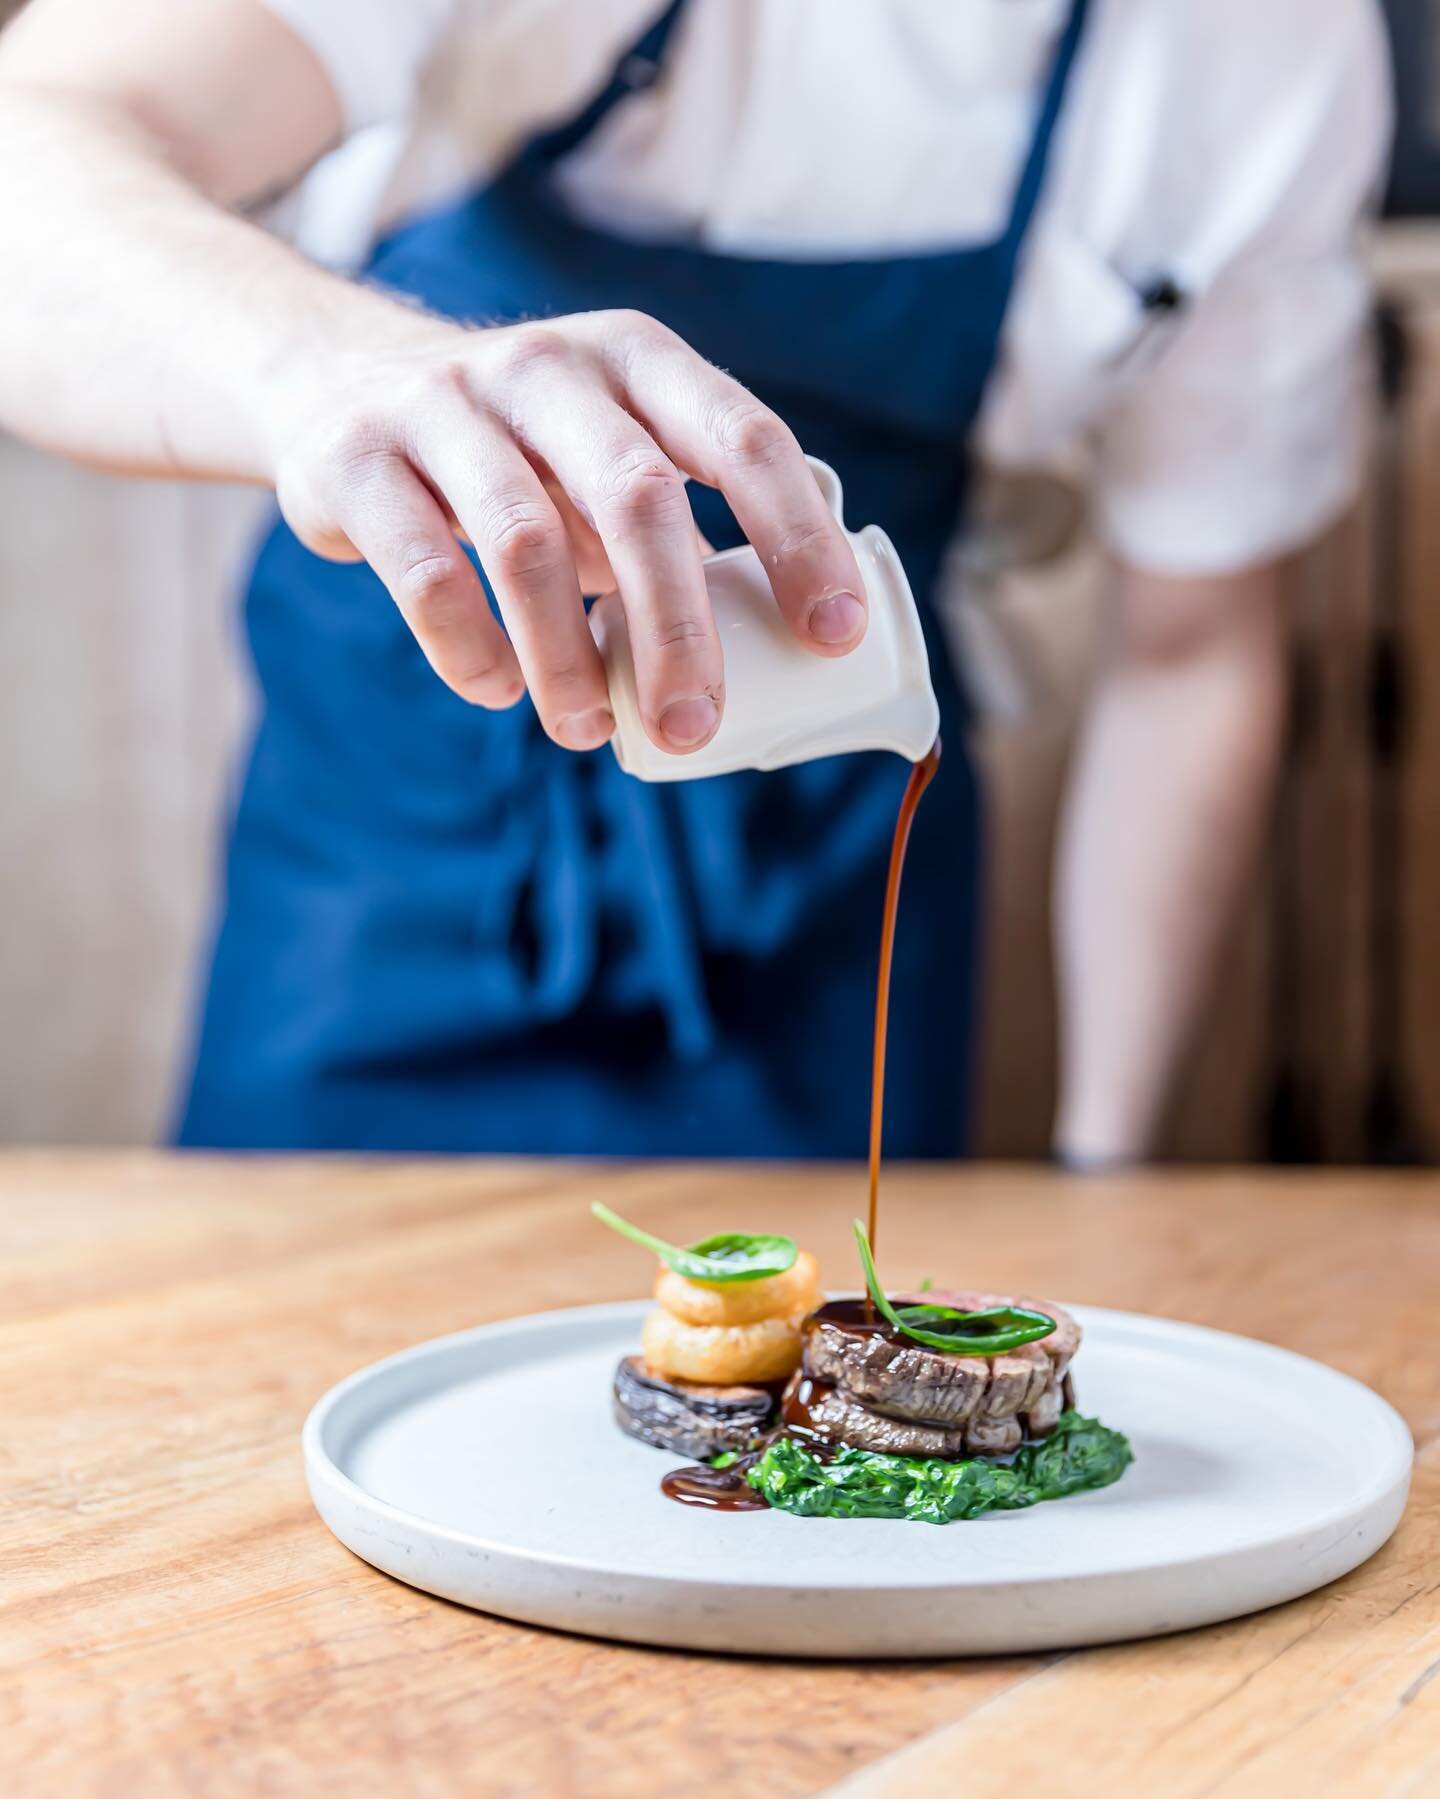 Dinner is served at @RichmondStation! 🚂

Chef @willkresky makes a point of using fresh, locally-sourced ingredients, including our Ontario Baby Spinach featured in this beautifully plated dish.